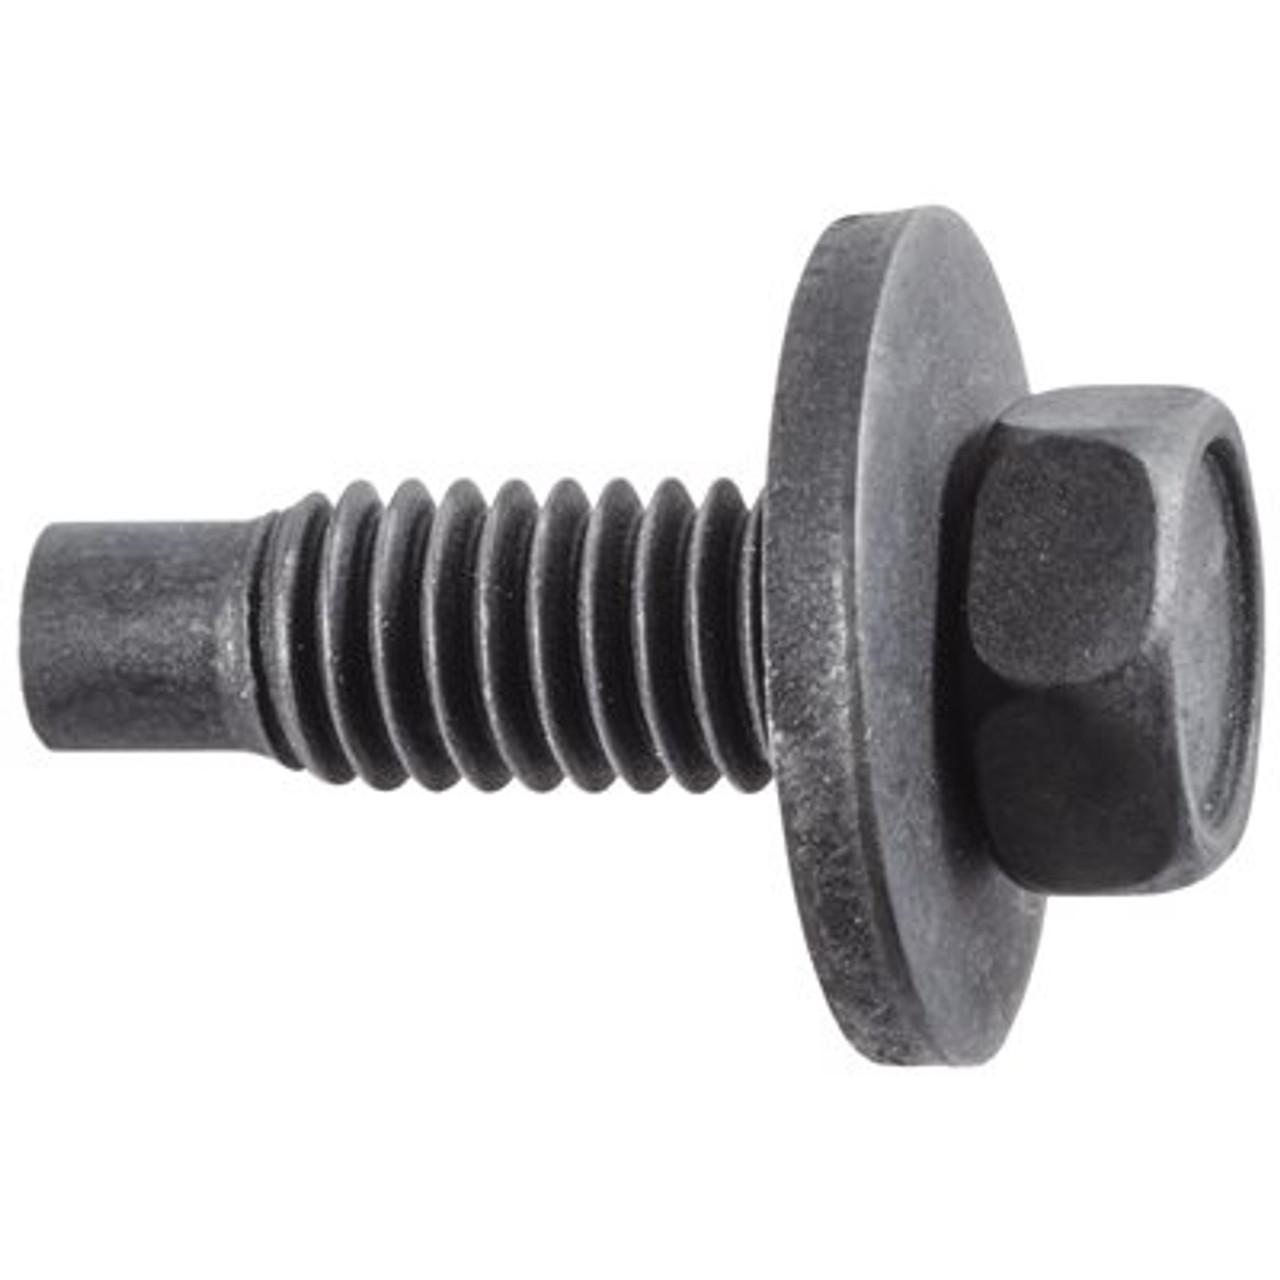 Description : Body Bolt
Screw Size : 3/8-16
Length : 1-3/16"
Finish : Black Phosphate
Across Flats : 9/16"
Head Style : Hex, Sems
Washer Diameter : 1"
Point Type : Dog
OEM Number : (57048S2)
Pcs/Unit: 50
Country: TW
Catalog Page #: 38